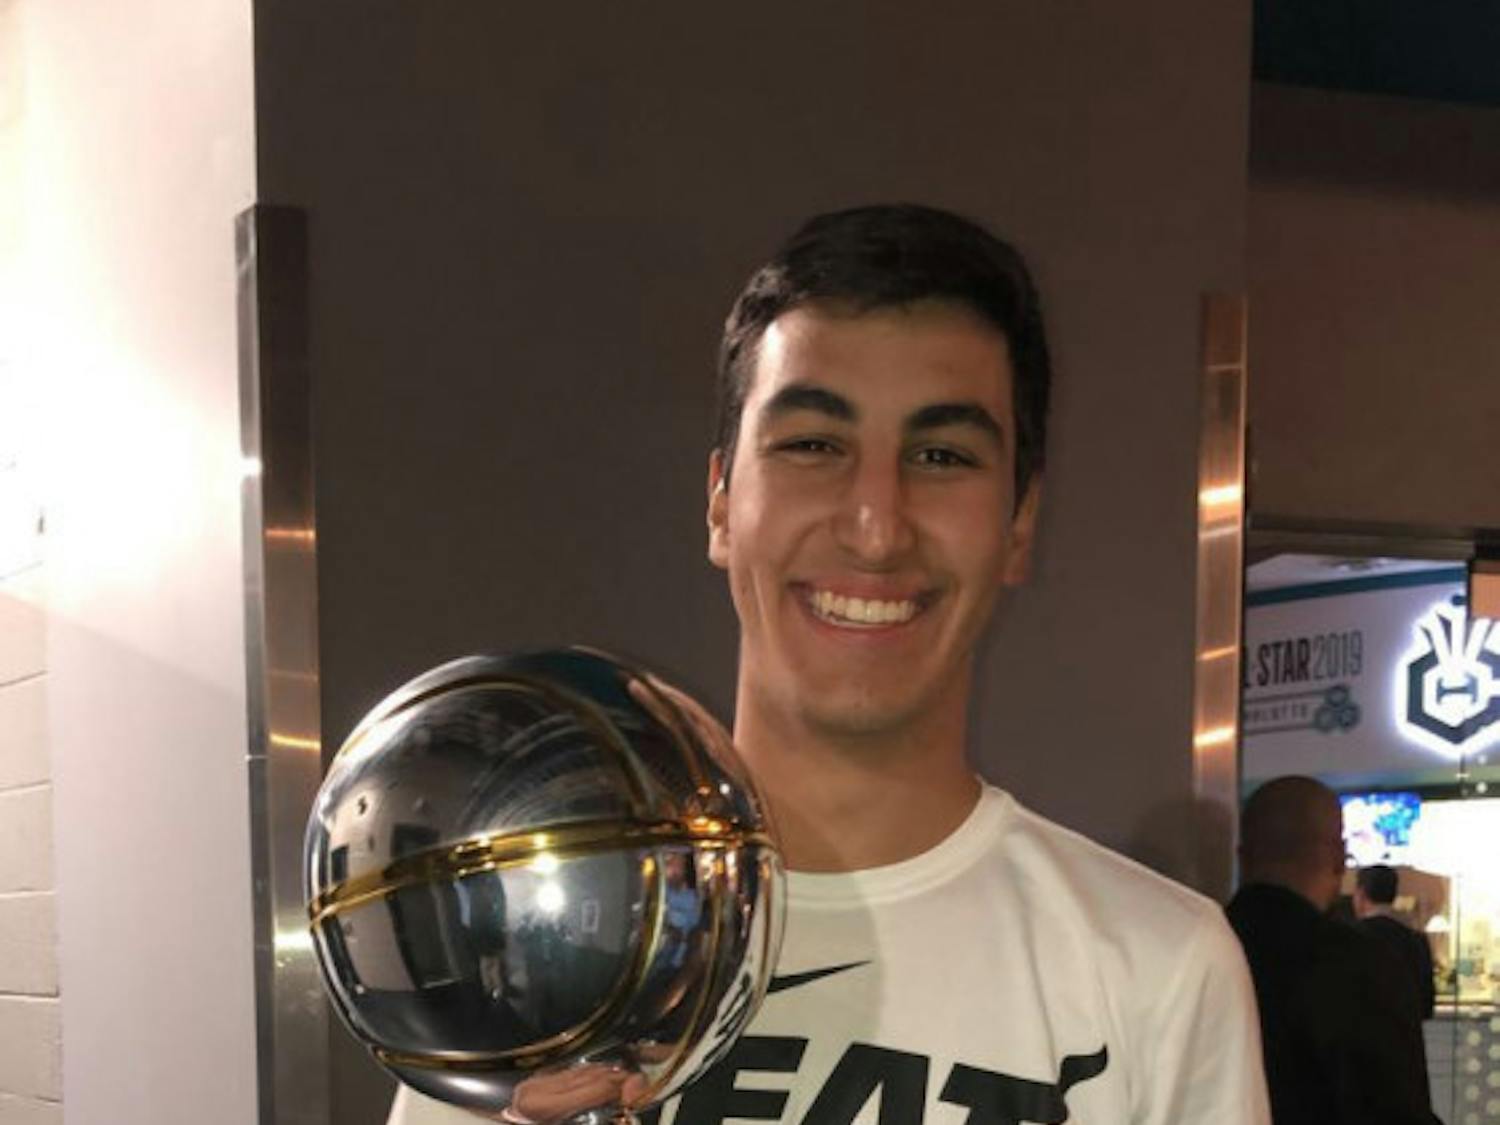 Victor Prieto poses after winning the NBA's first Pop-A-Shot Championship at All-Star Weekend.